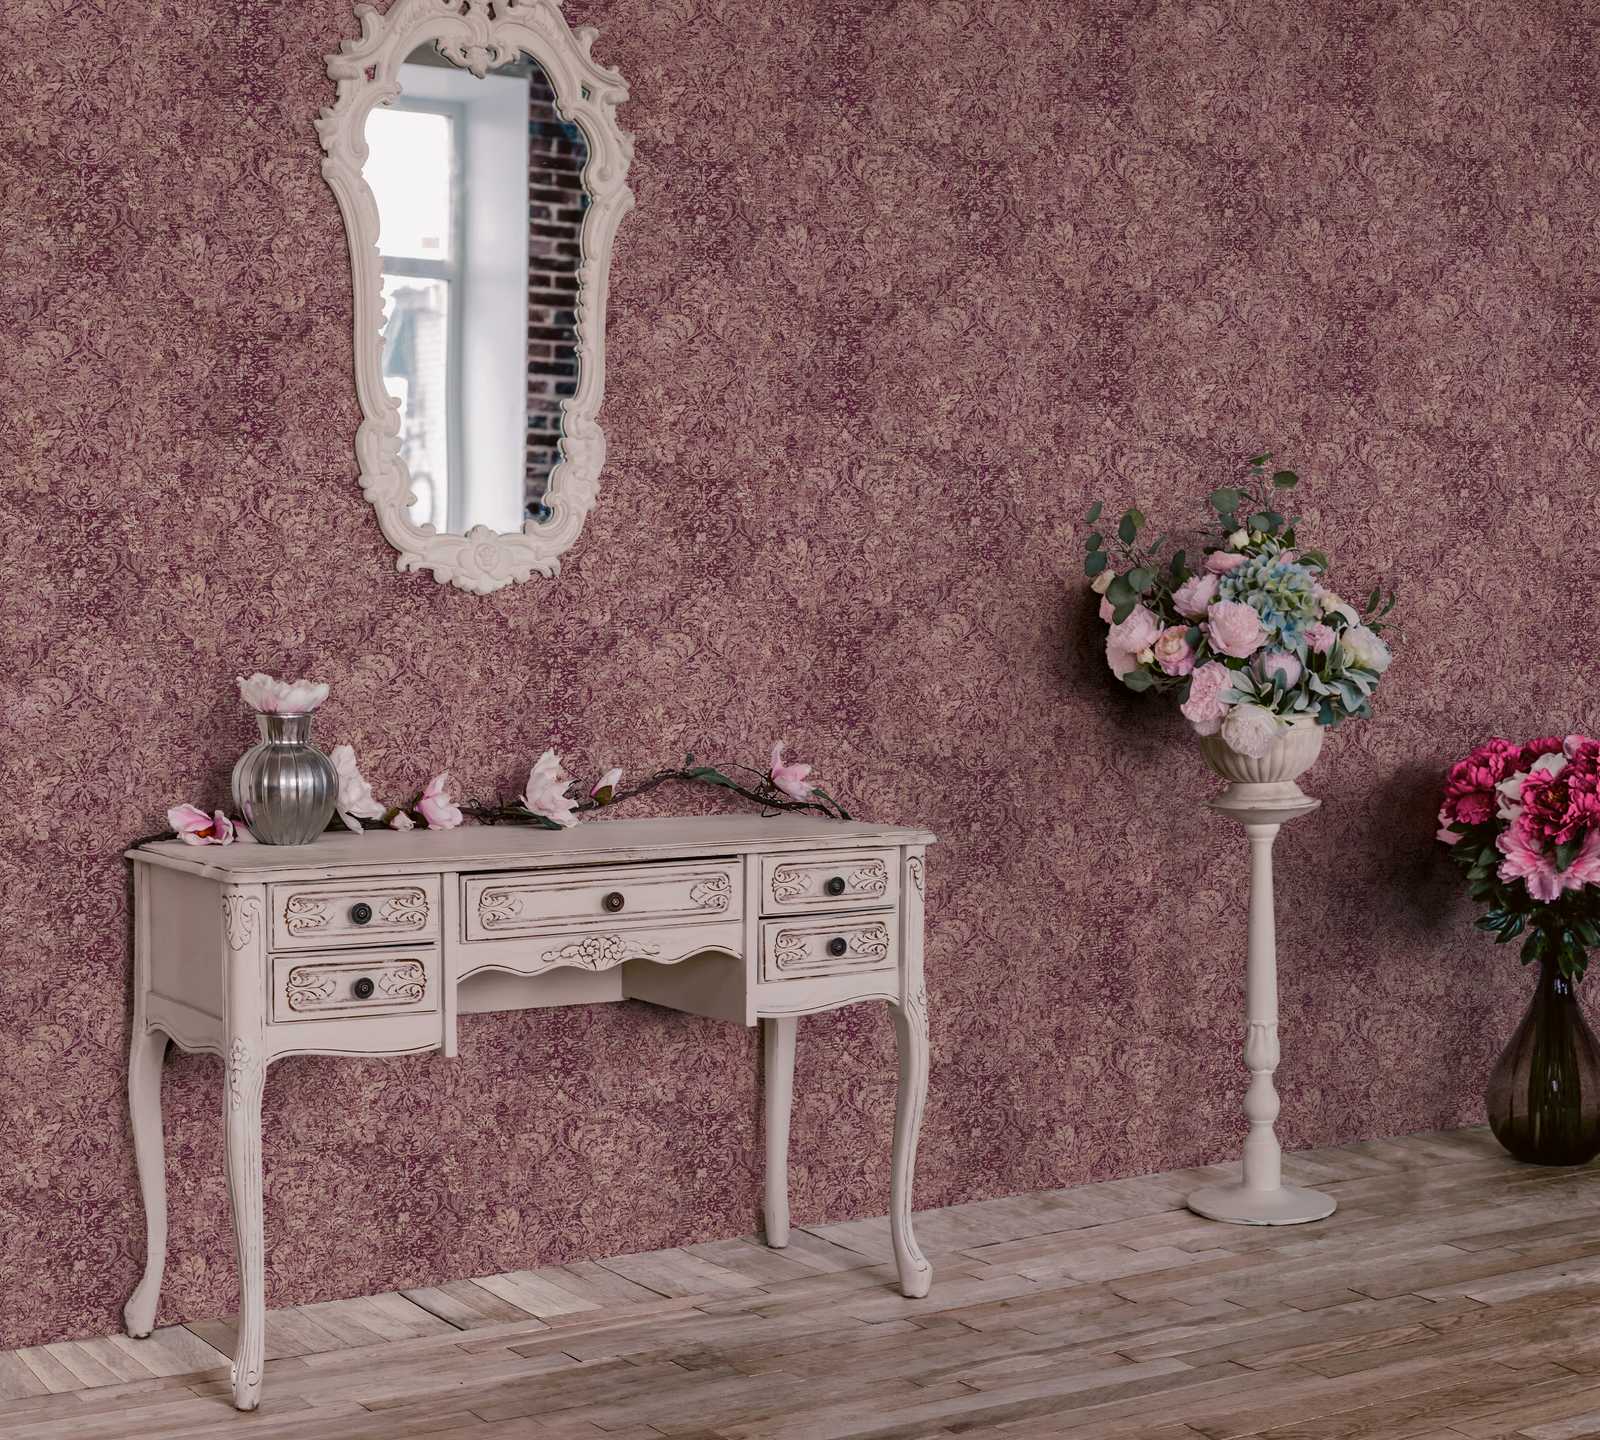             Vintage wallpaper with used look ornaments - pink
        